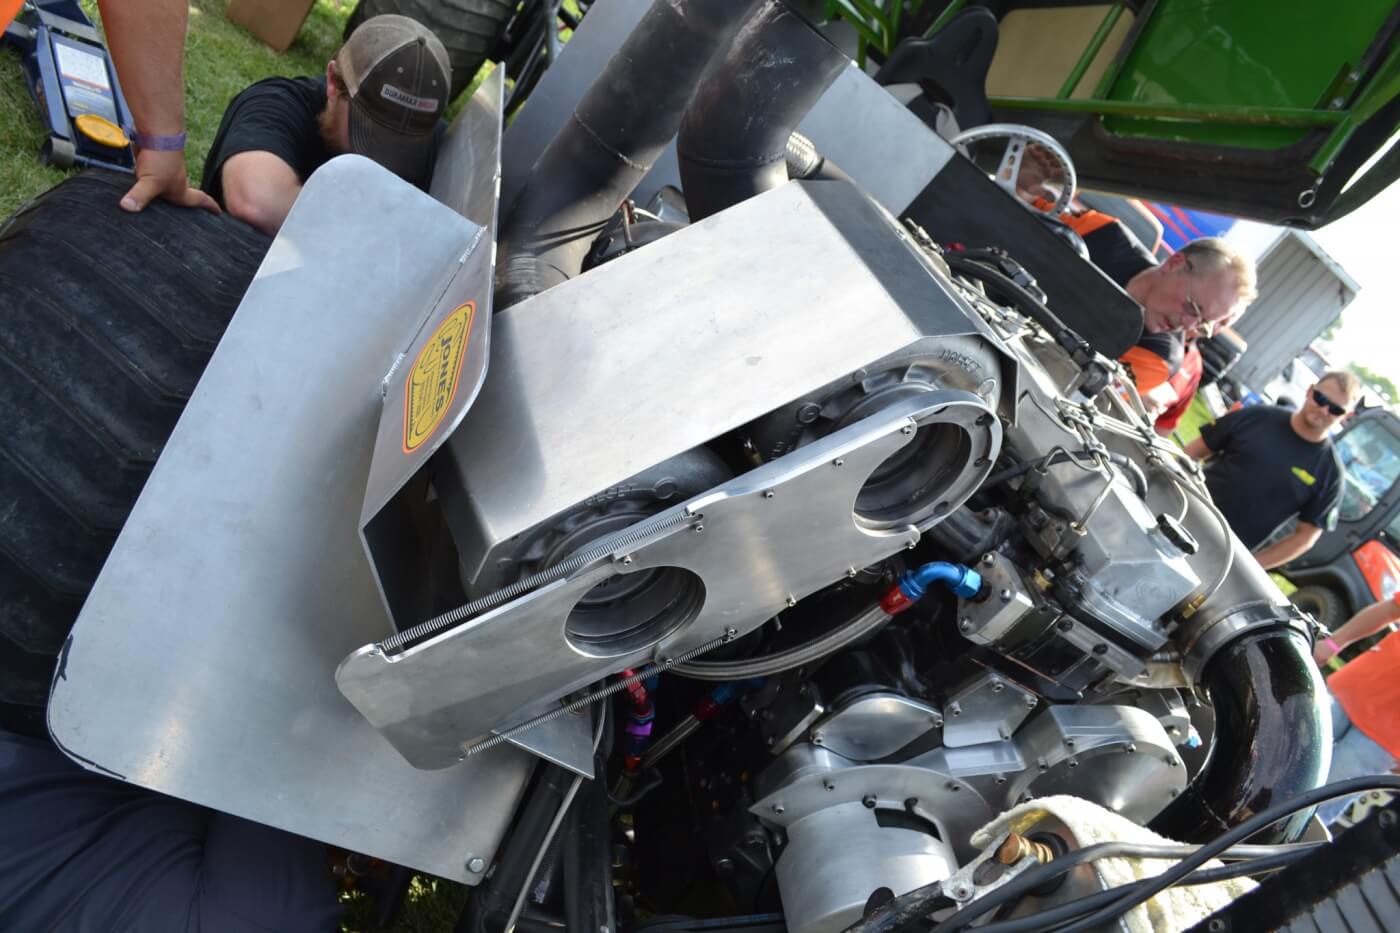 The most extreme cases of turbocharging involve sled pulling, where two large-frame turbos (like HX82s) are used to blow into a third turbo, which then sends the air to the engine. With intercoolers and boost pressures above 150 psi, these systems are capable of more than 2,500 horsepower.